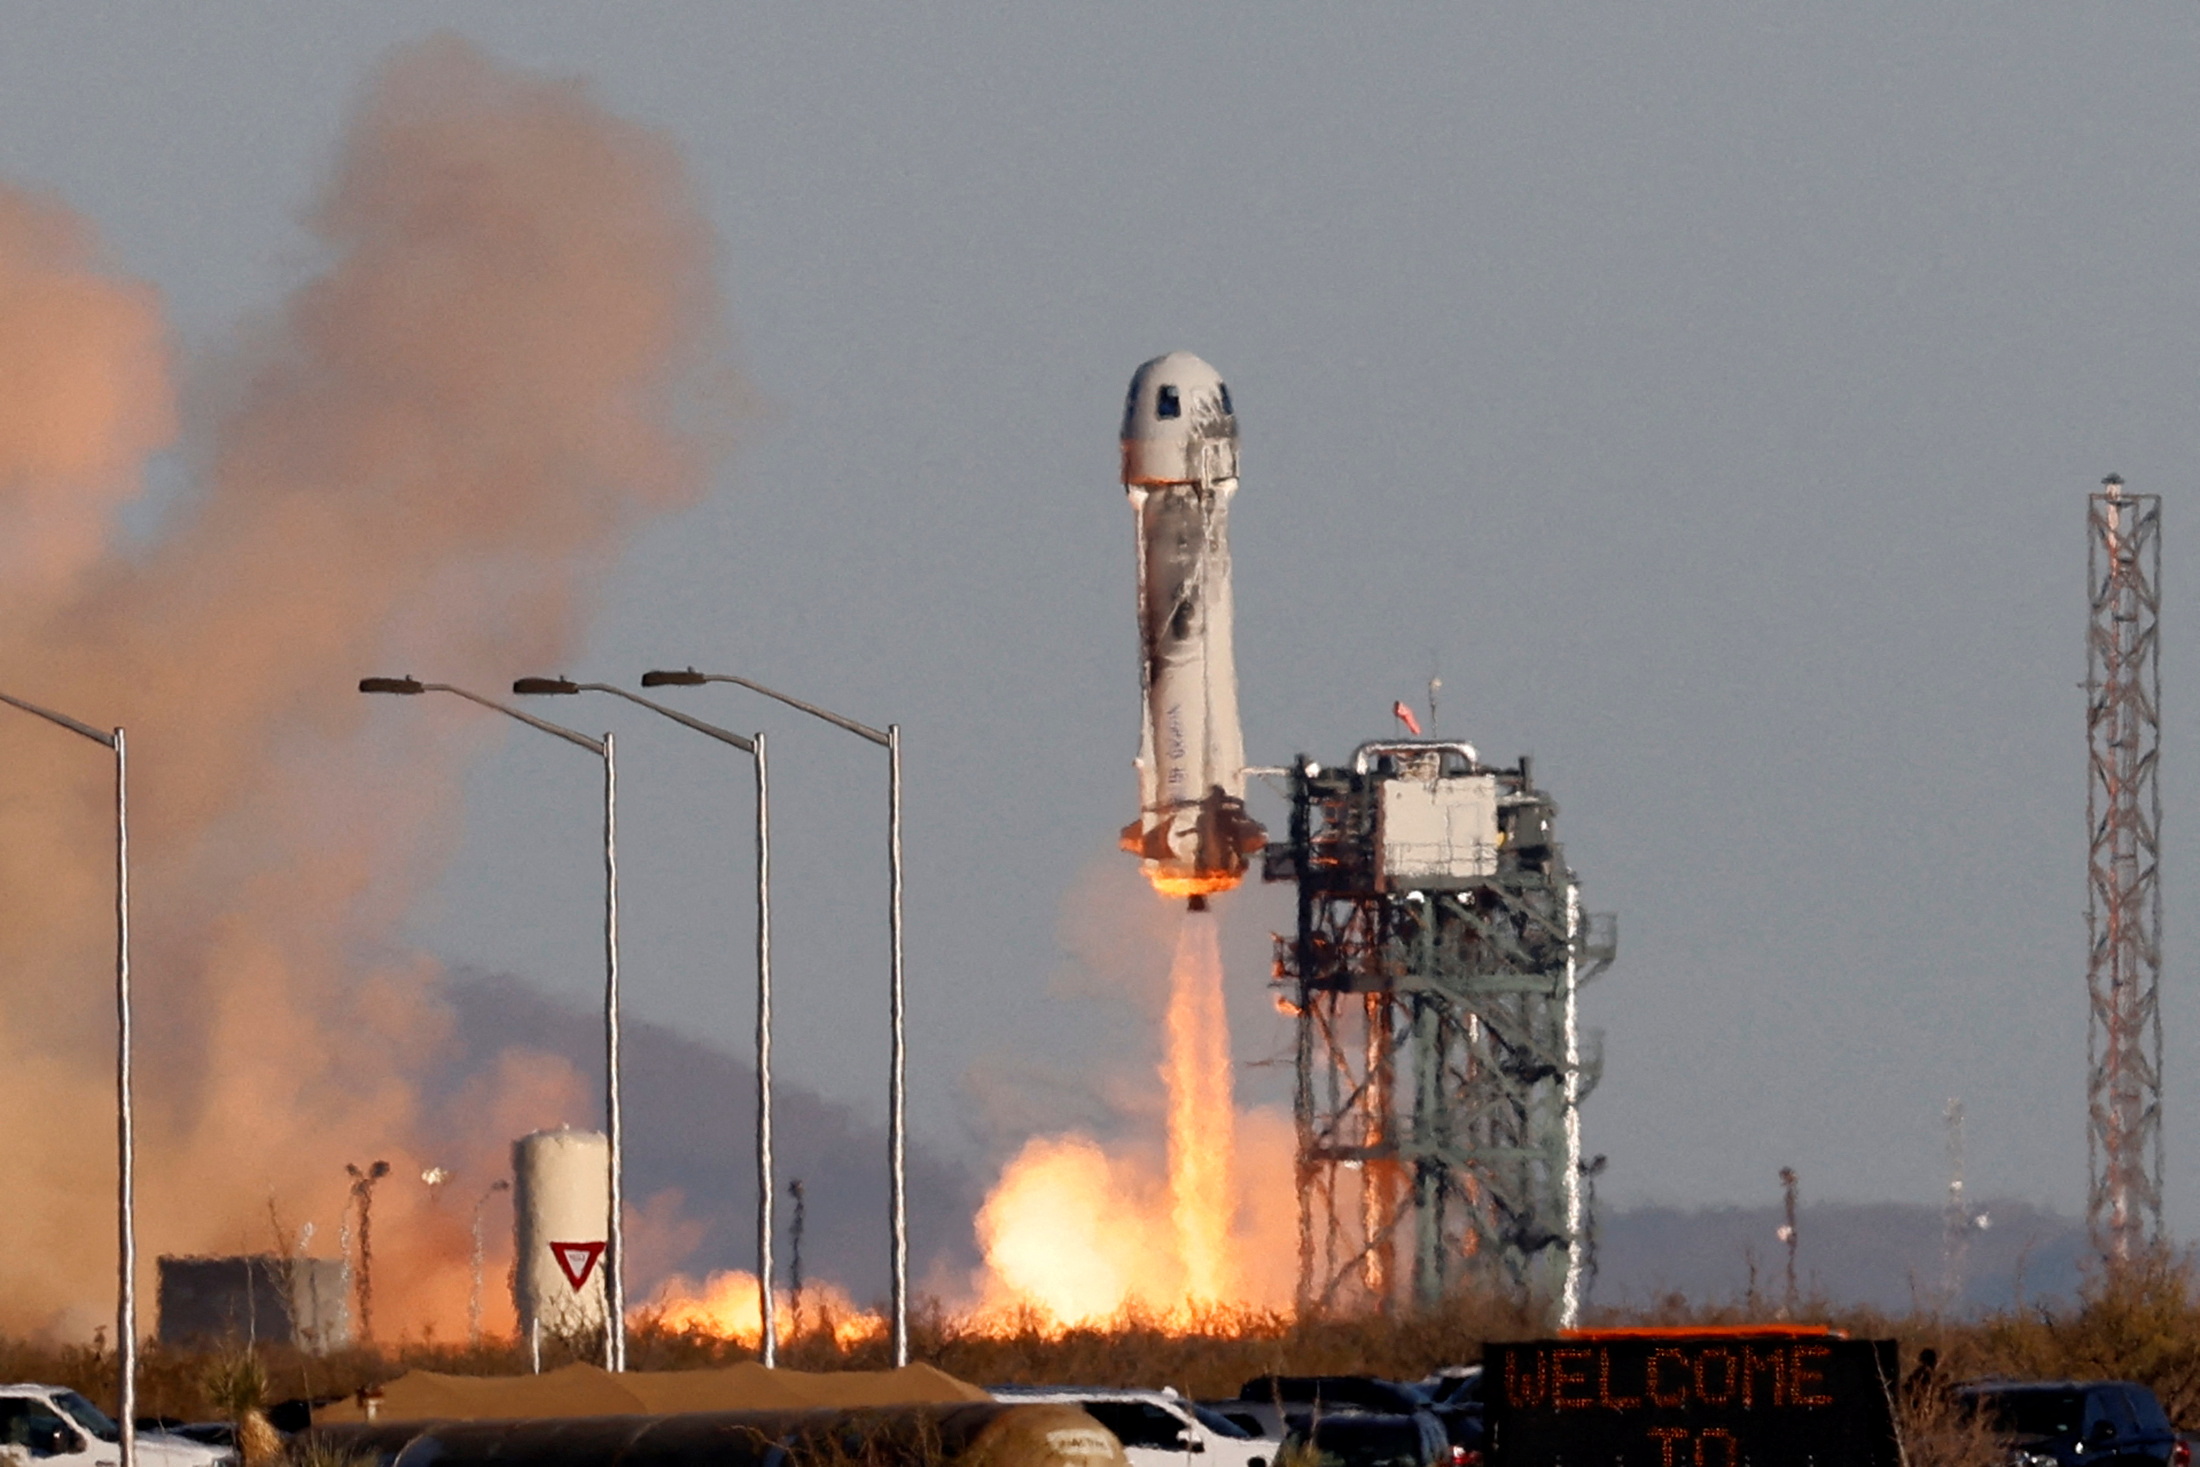 FILE PHOTO: A Blue Origin New Shepard rocket lifts off with a crew of six, including Laura Shepard Churchley, the daughter of the first American in space Alan Shepard, for whom the spacecraft is named, from Launch Site One in west Texas, U.S. December 11, 2021. REUTERS/Joe Skipper/File Photo